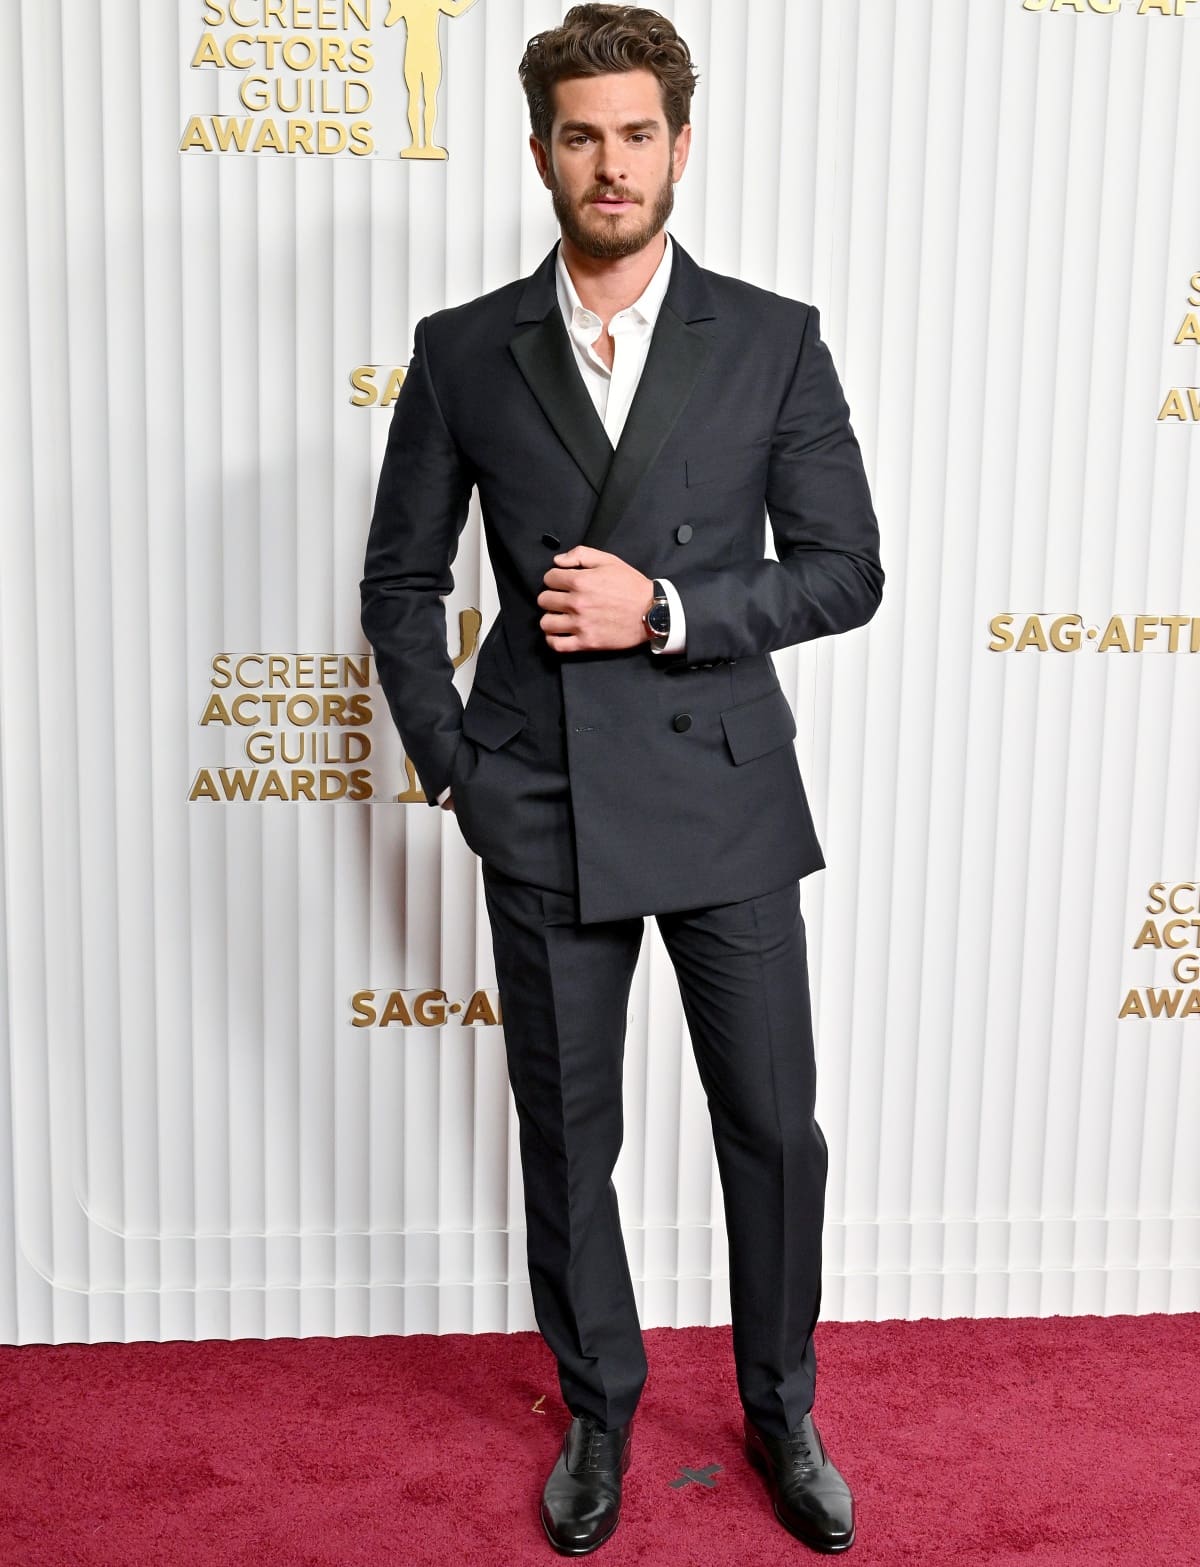 Andrew Garfield looking dapper in a custom Valentino suit with Santoni shoes at the 29th Annual Screen Actors Guild Awards